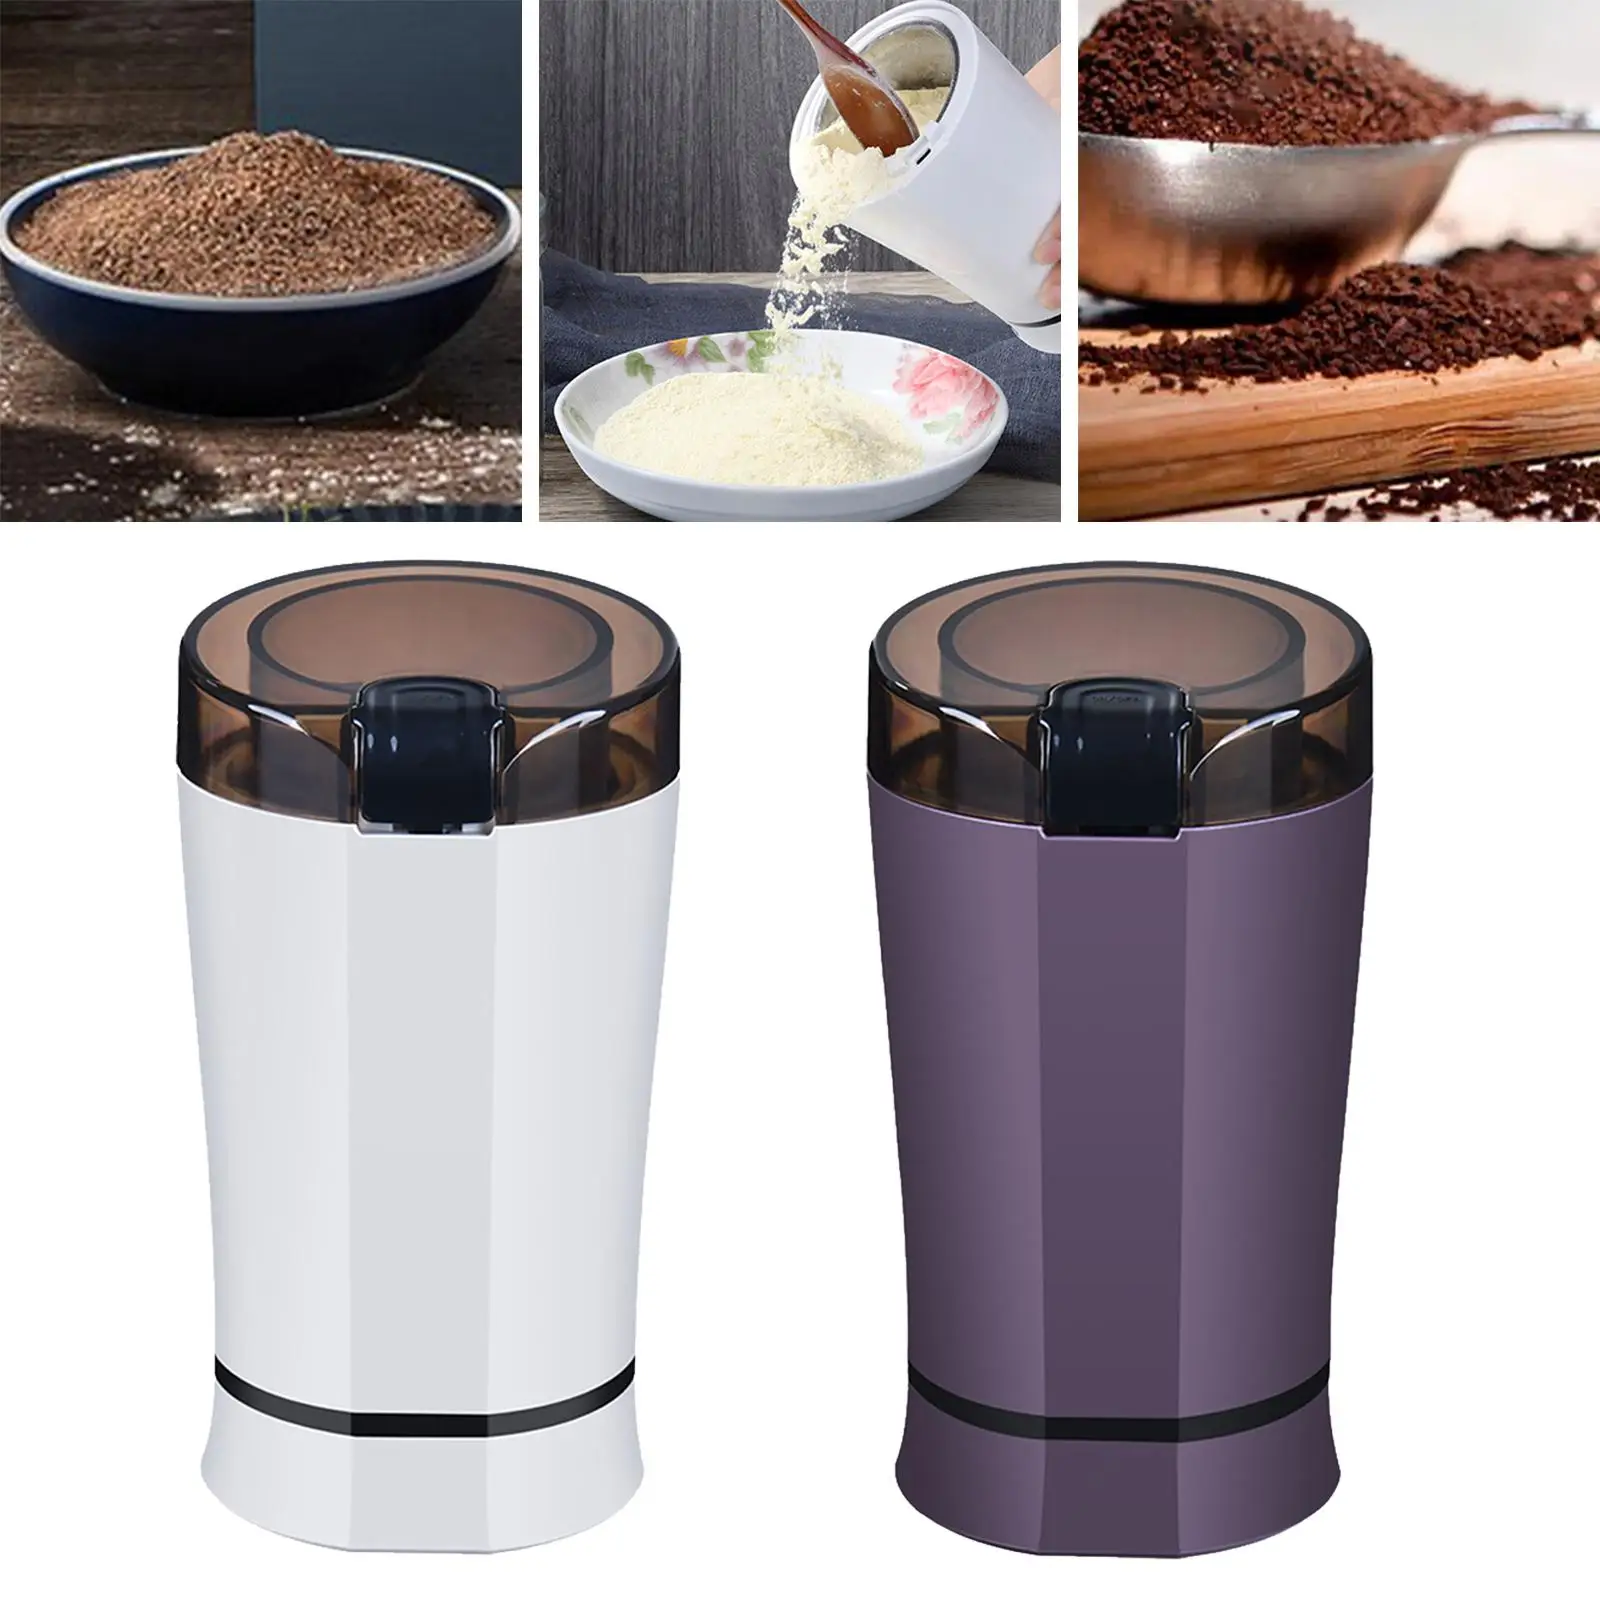 Multifunctional Electric Grinding Machine Kitchen Grain Mill 110V Coffee Bean for Grains Seeds Peanut Coffee bean